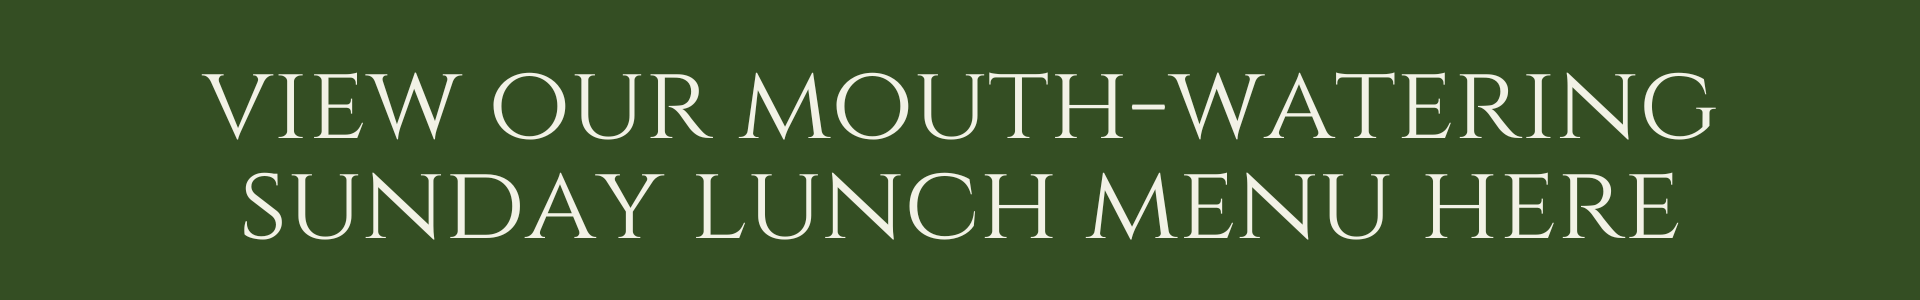 View our mouth-watering sunday lunch menu here